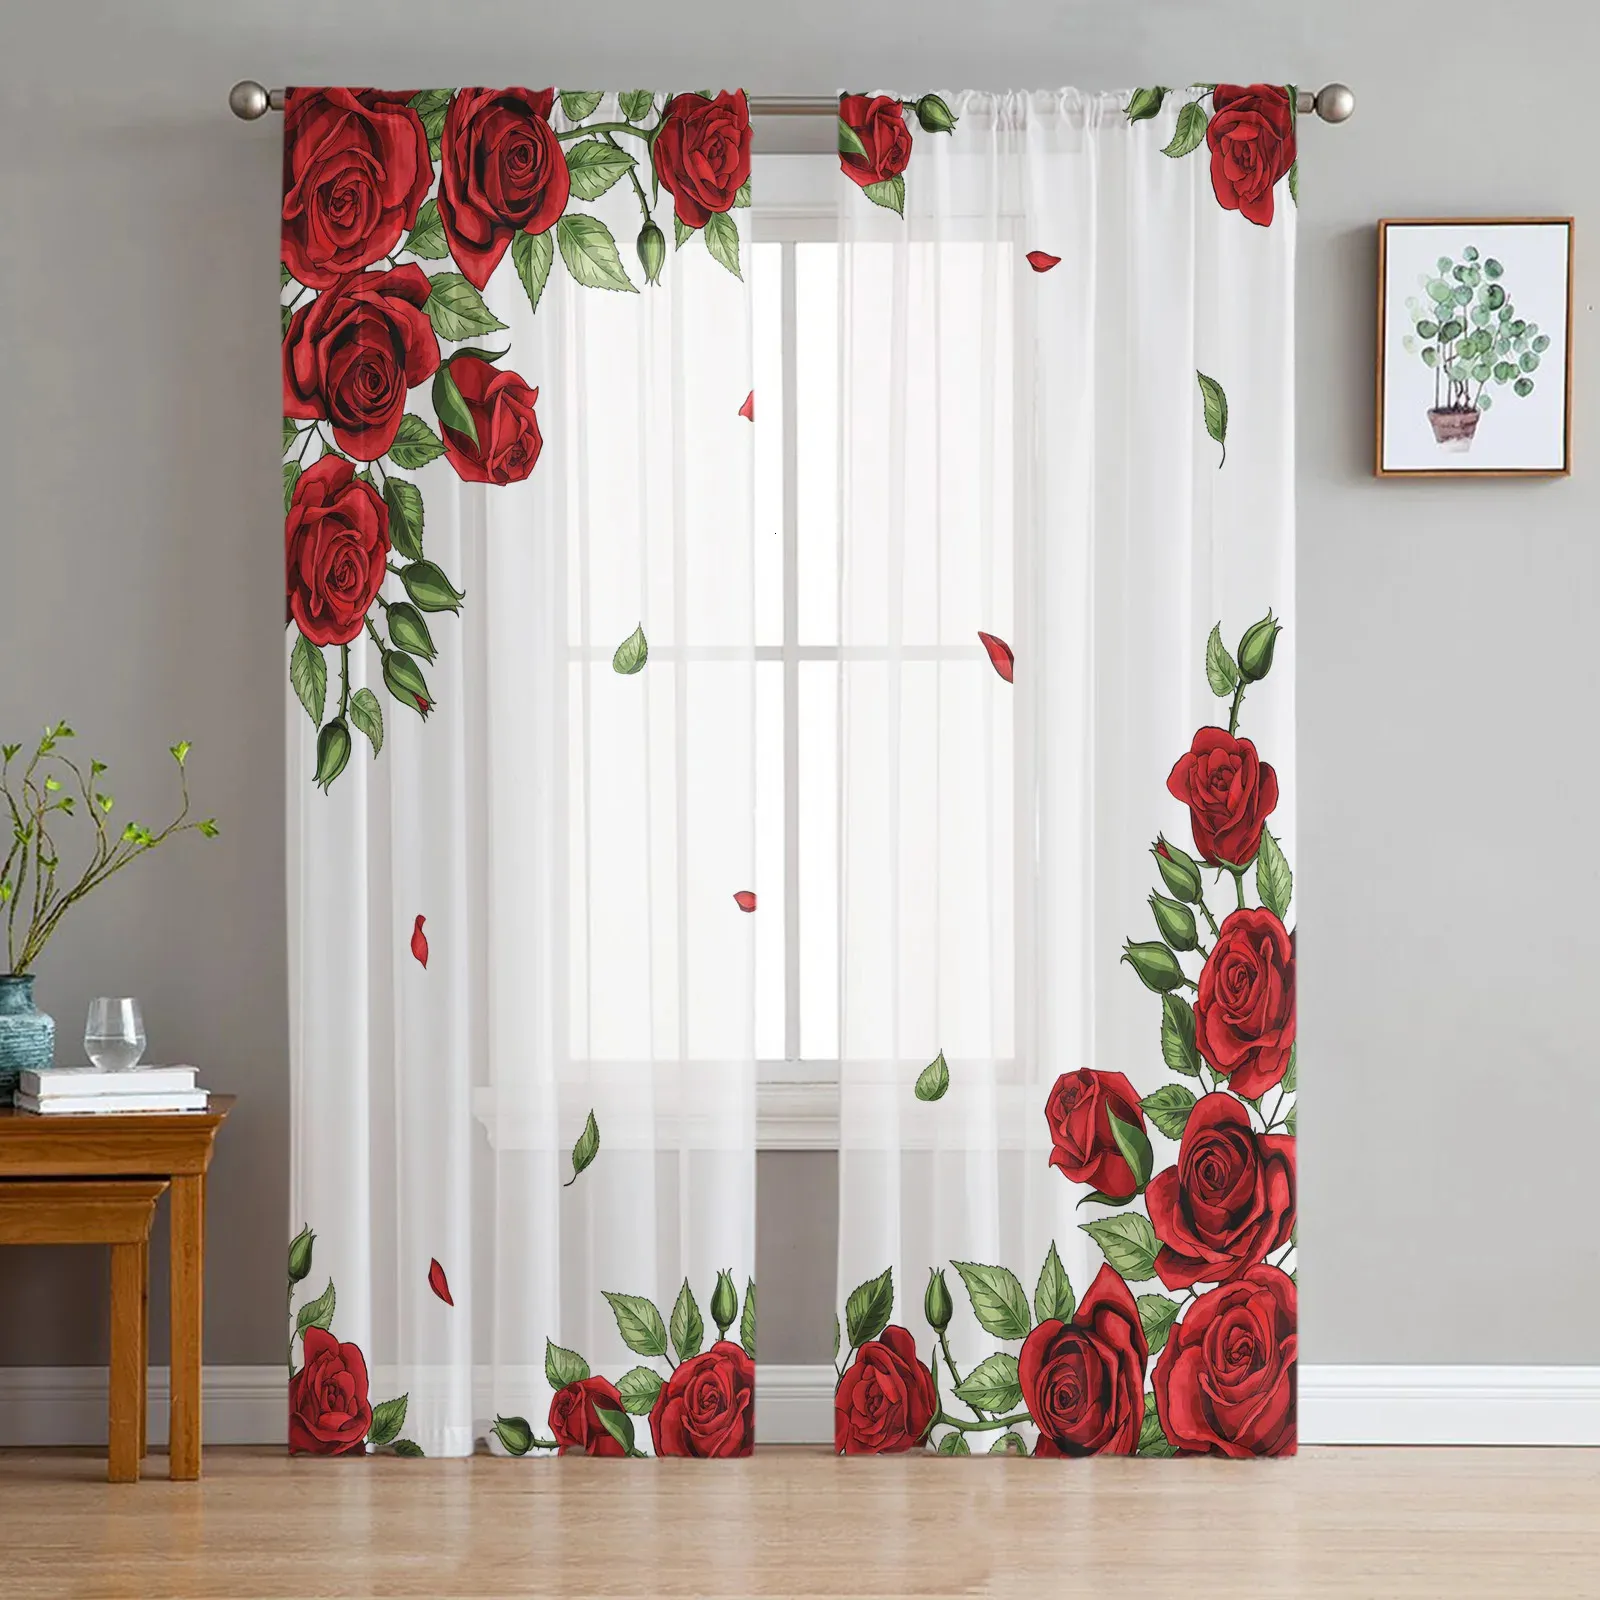 Curtain Valentine'S Day Rose Red Flowers Tulle Curtain Living Room Luxury Sheer Curtain Home Decor Chiffon Drapes Gauze Window Curtain 231018